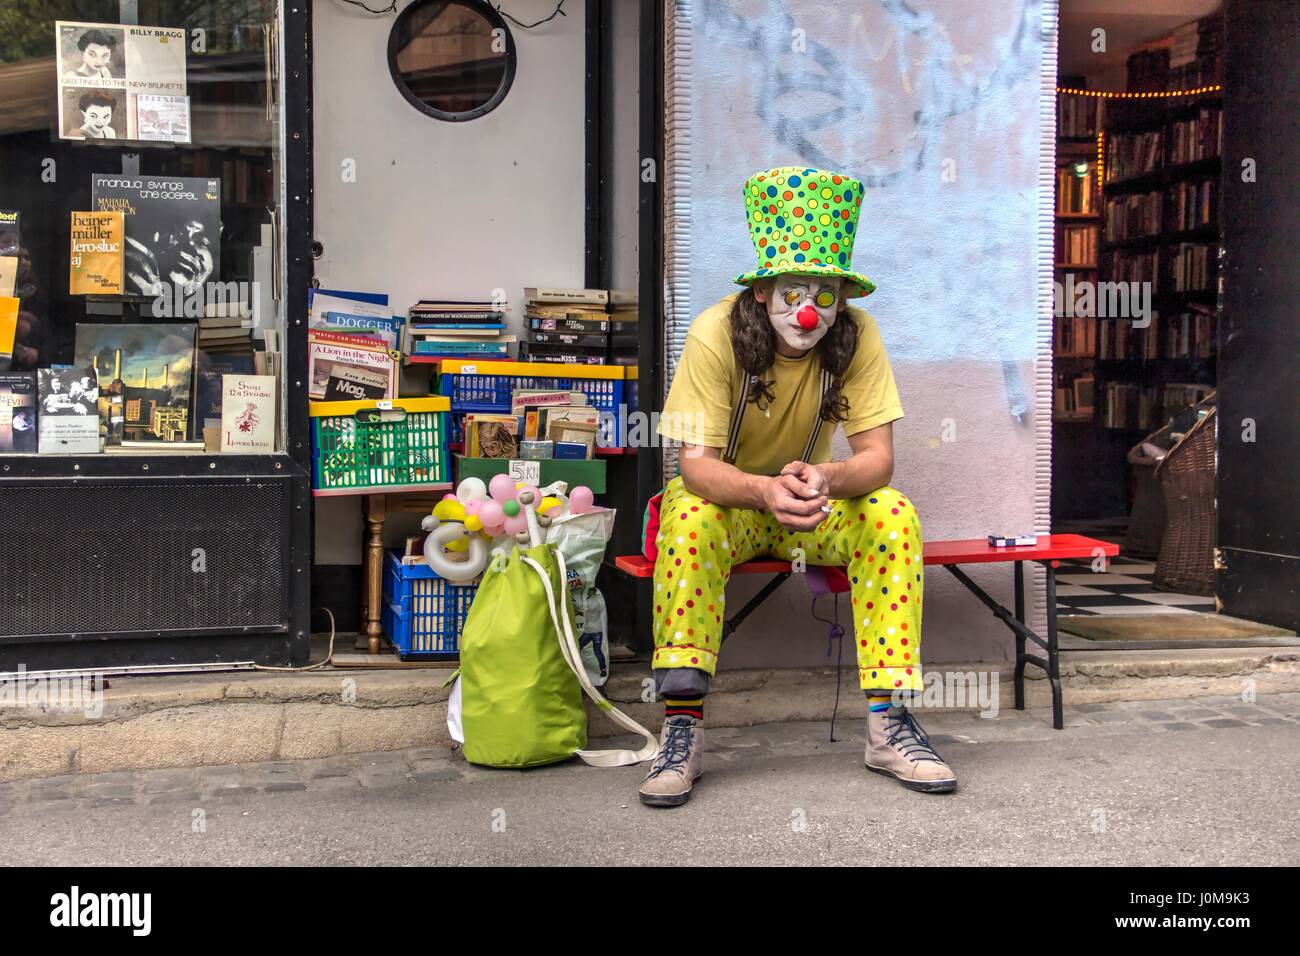 Zagreb, Croatia - Clown sitting in front of an antique bookstore Stock Photo